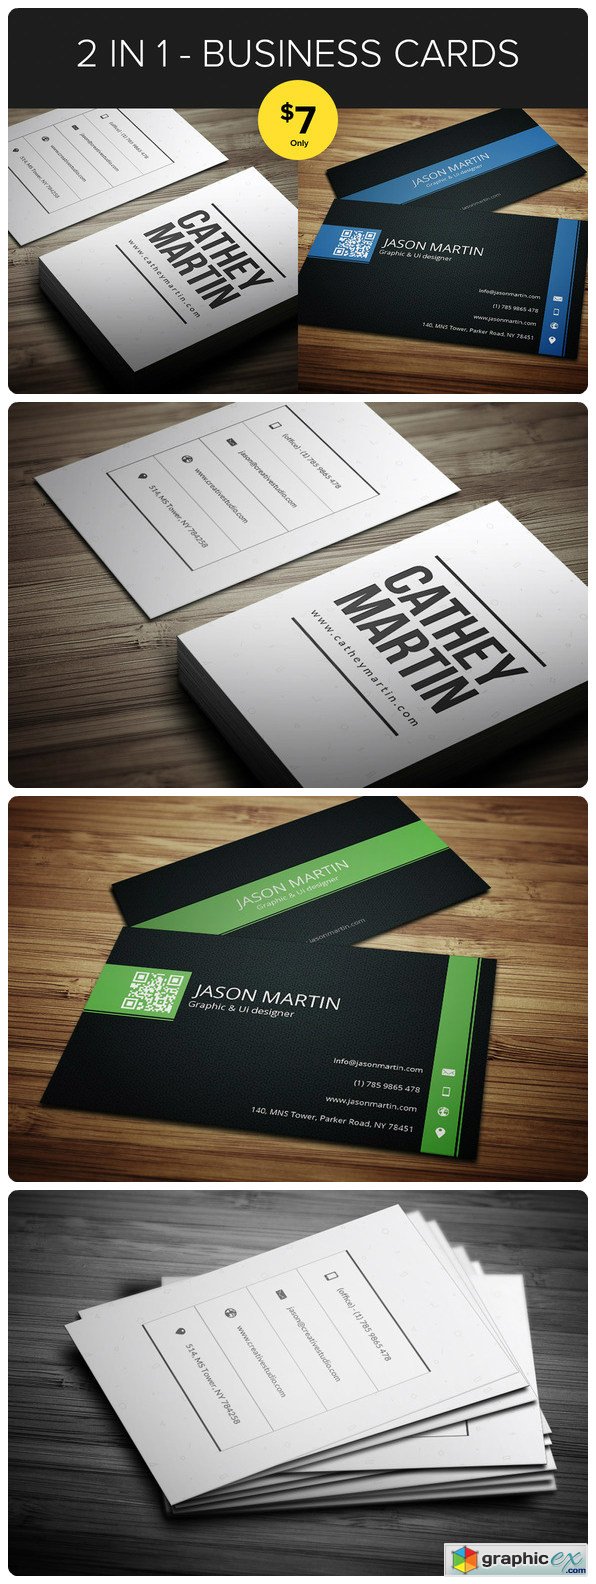 Bundle 2 in 1 - Business Cards